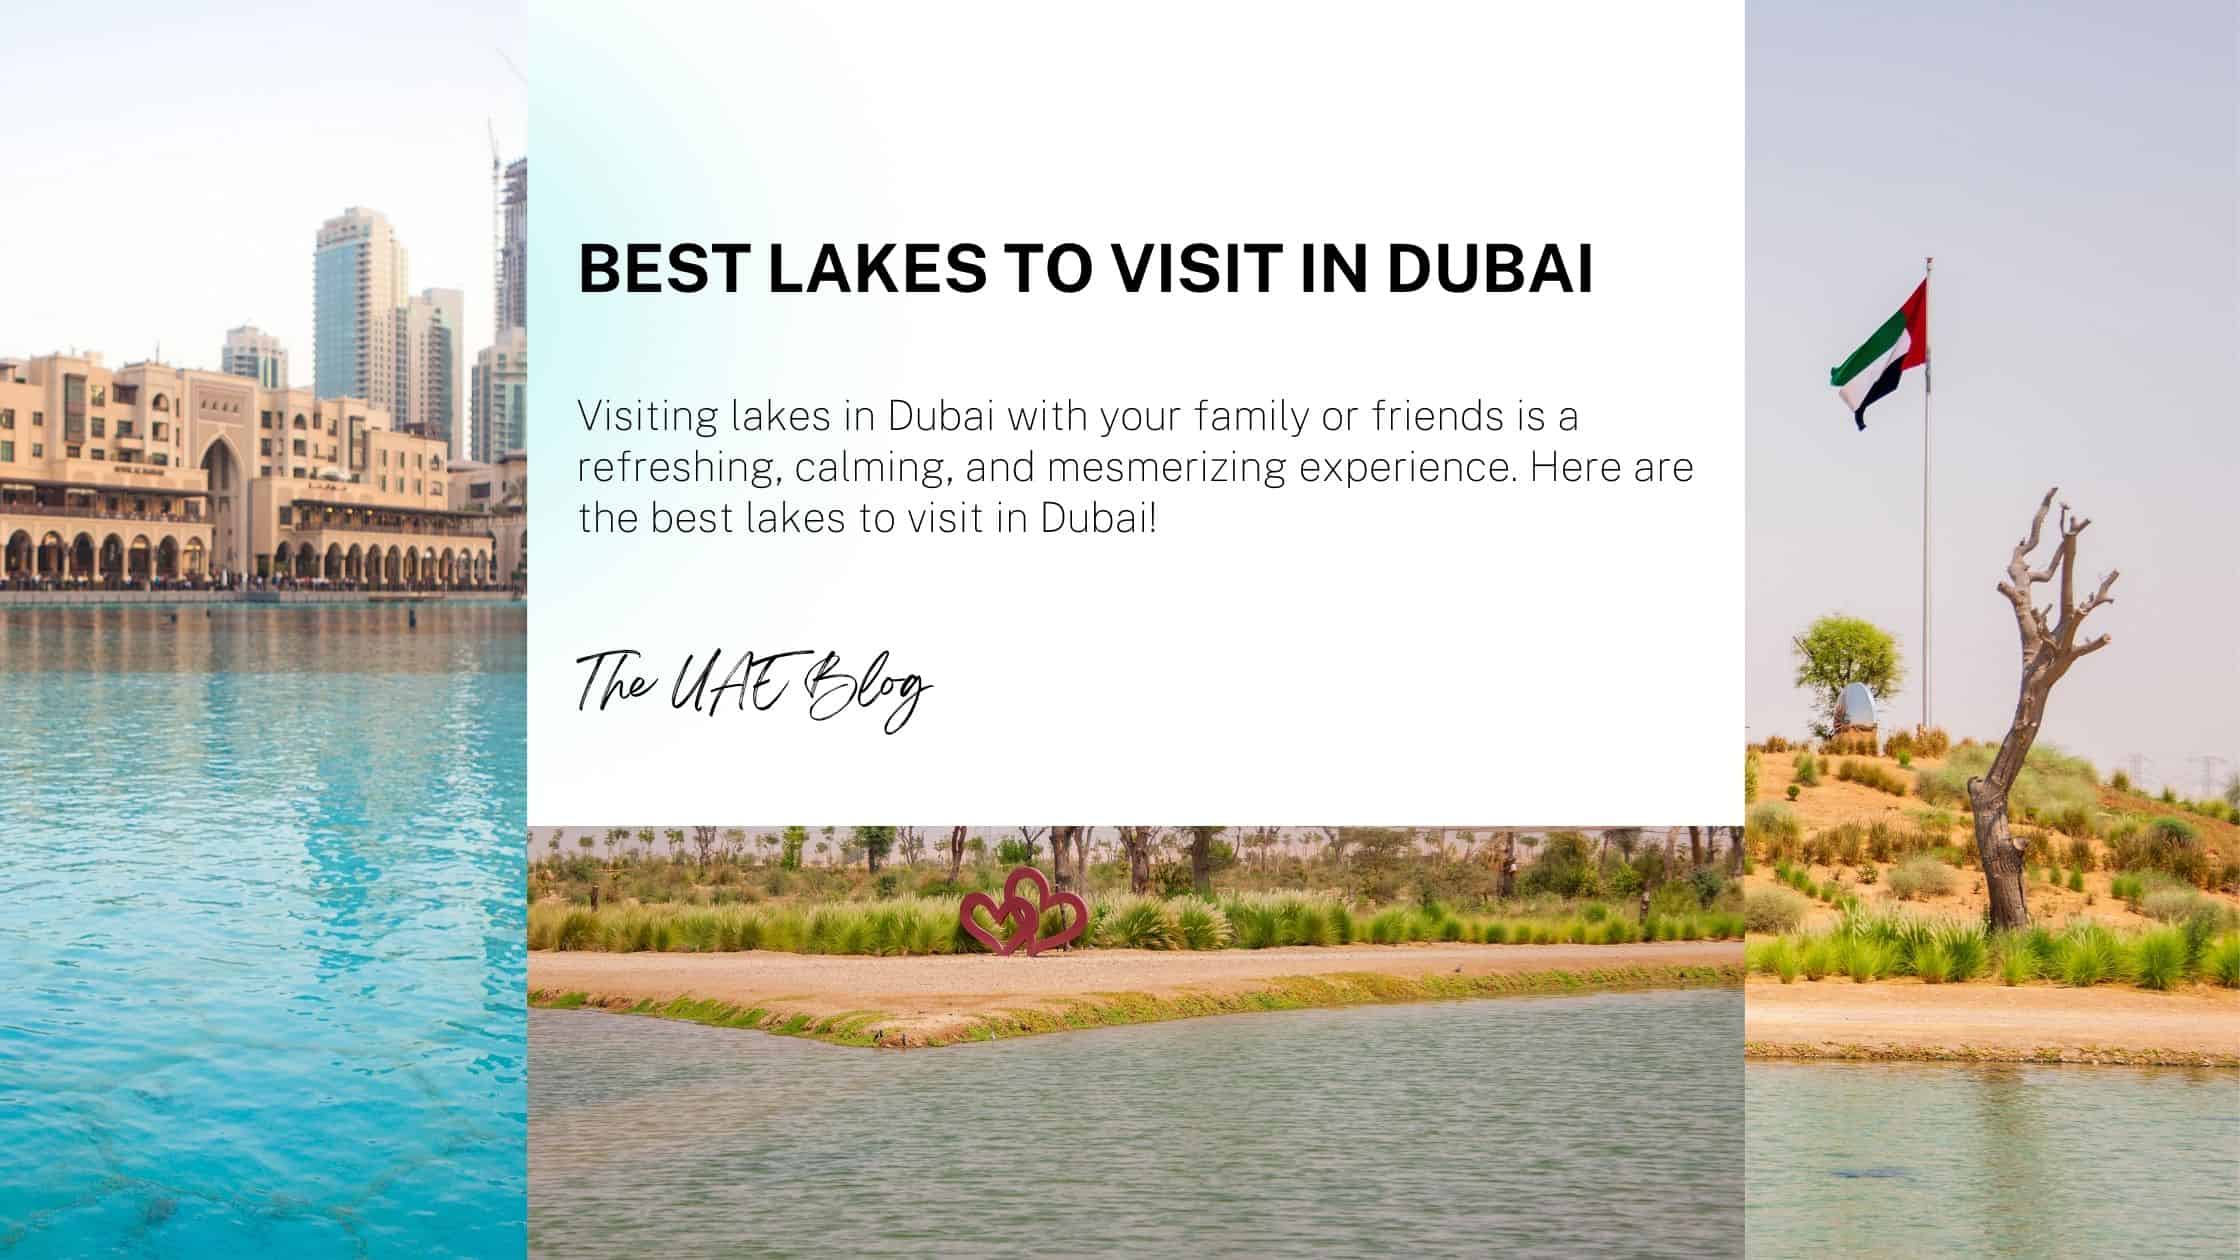 Best lakes to visit in Dubai